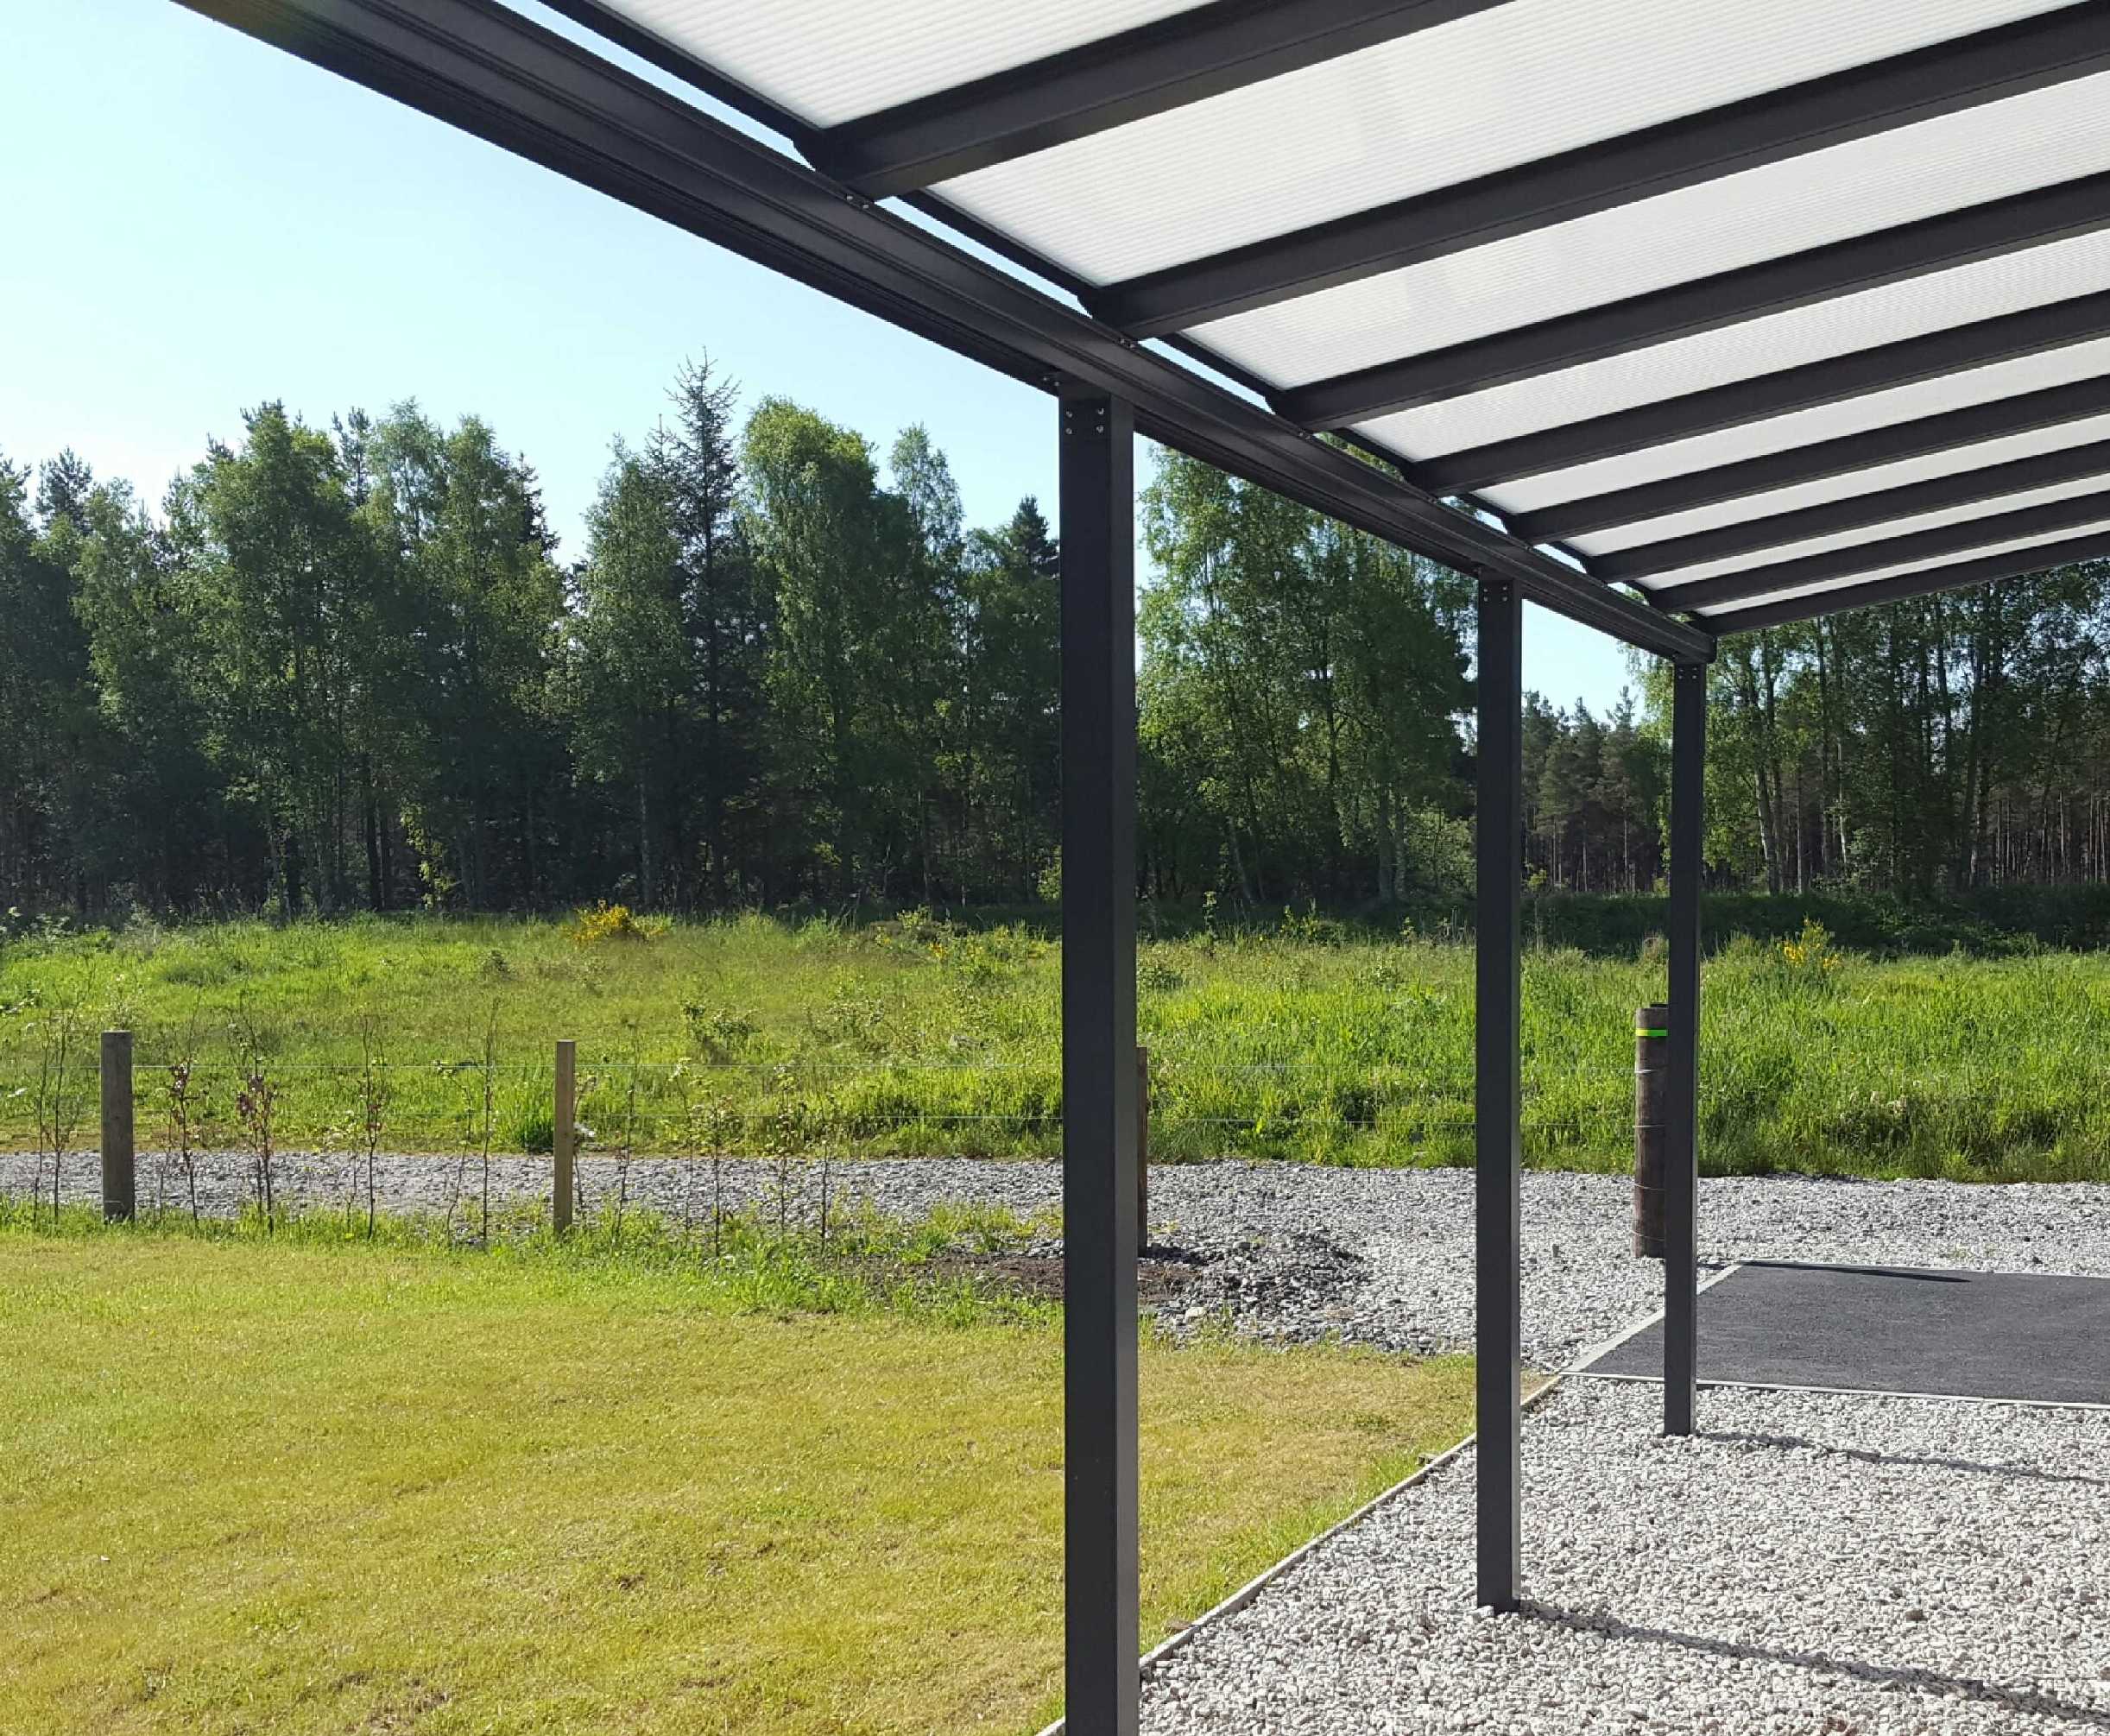 Omega Smart Lean-To Canopy, Anthracite Grey, 6mm Glass Clear Plate Polycarbonate Glazing - 9.8m (W) x 2.0m (P), (5) Supporting Posts